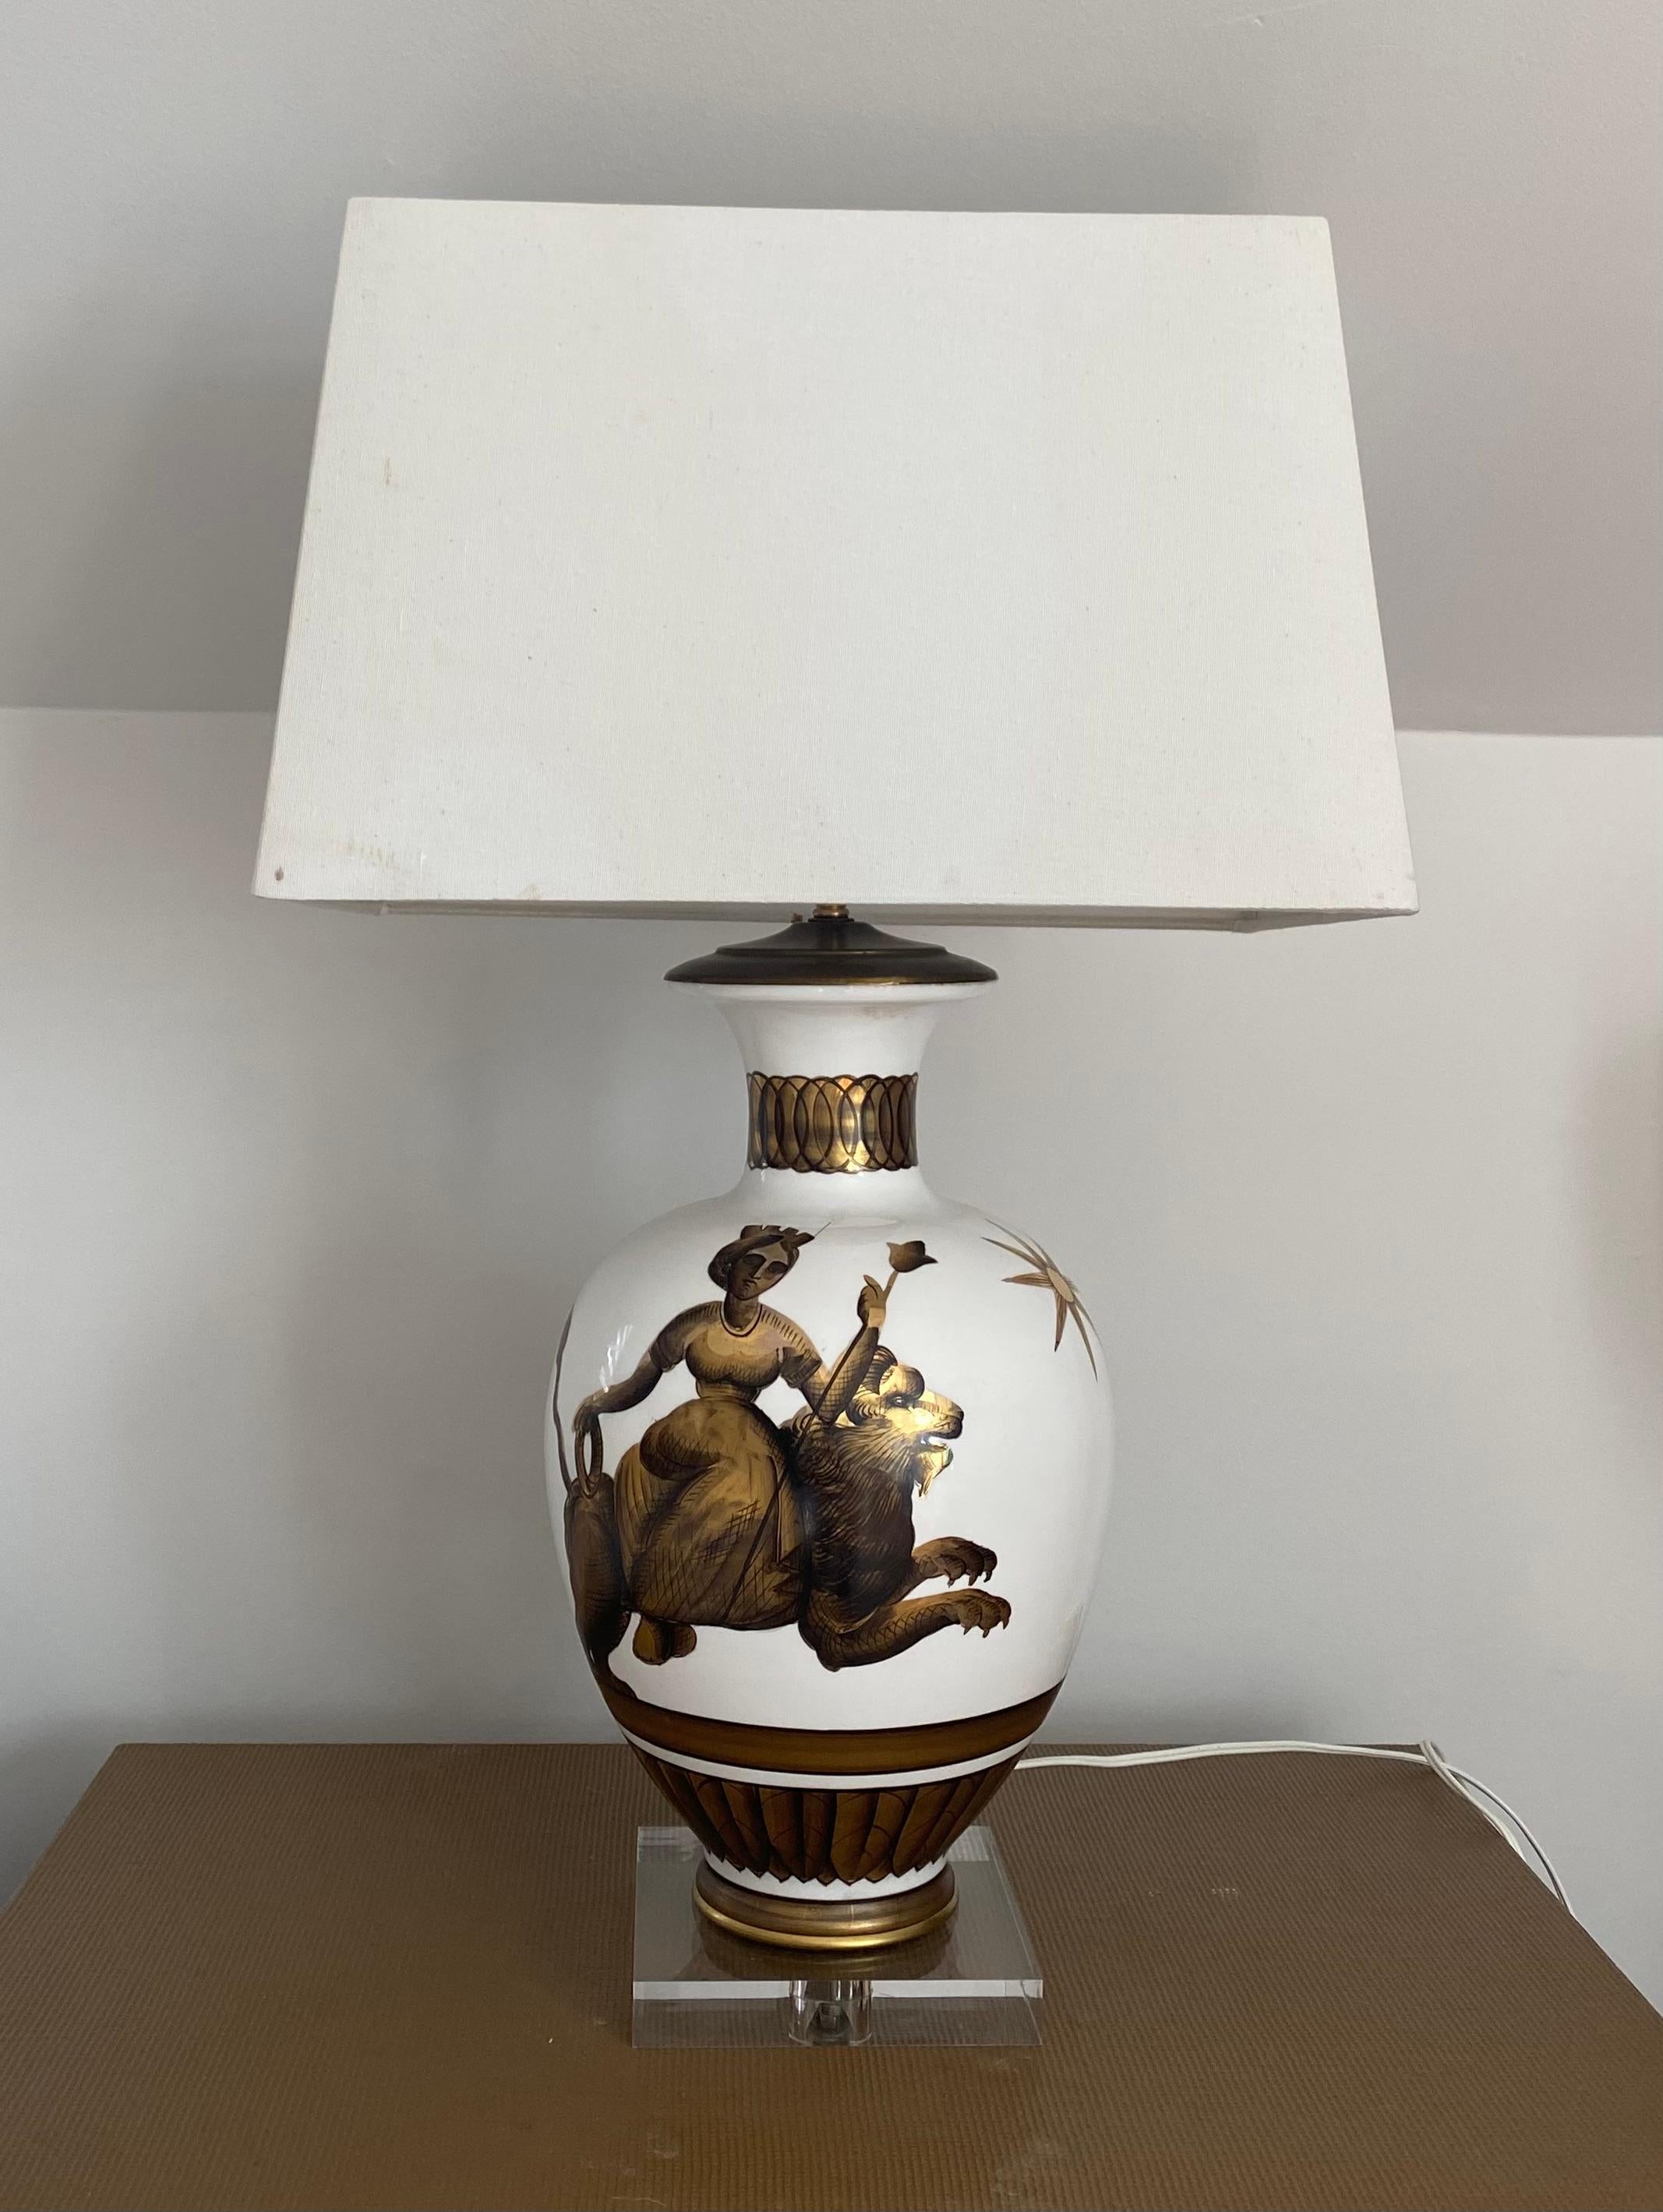 Parzinger milk glass lamps painted with classical figures.
Plexiglass base for a modern look.


Dimensions
9 inches widest diameter - 17 inches high plus 10 inch shade for total of 27 inches high